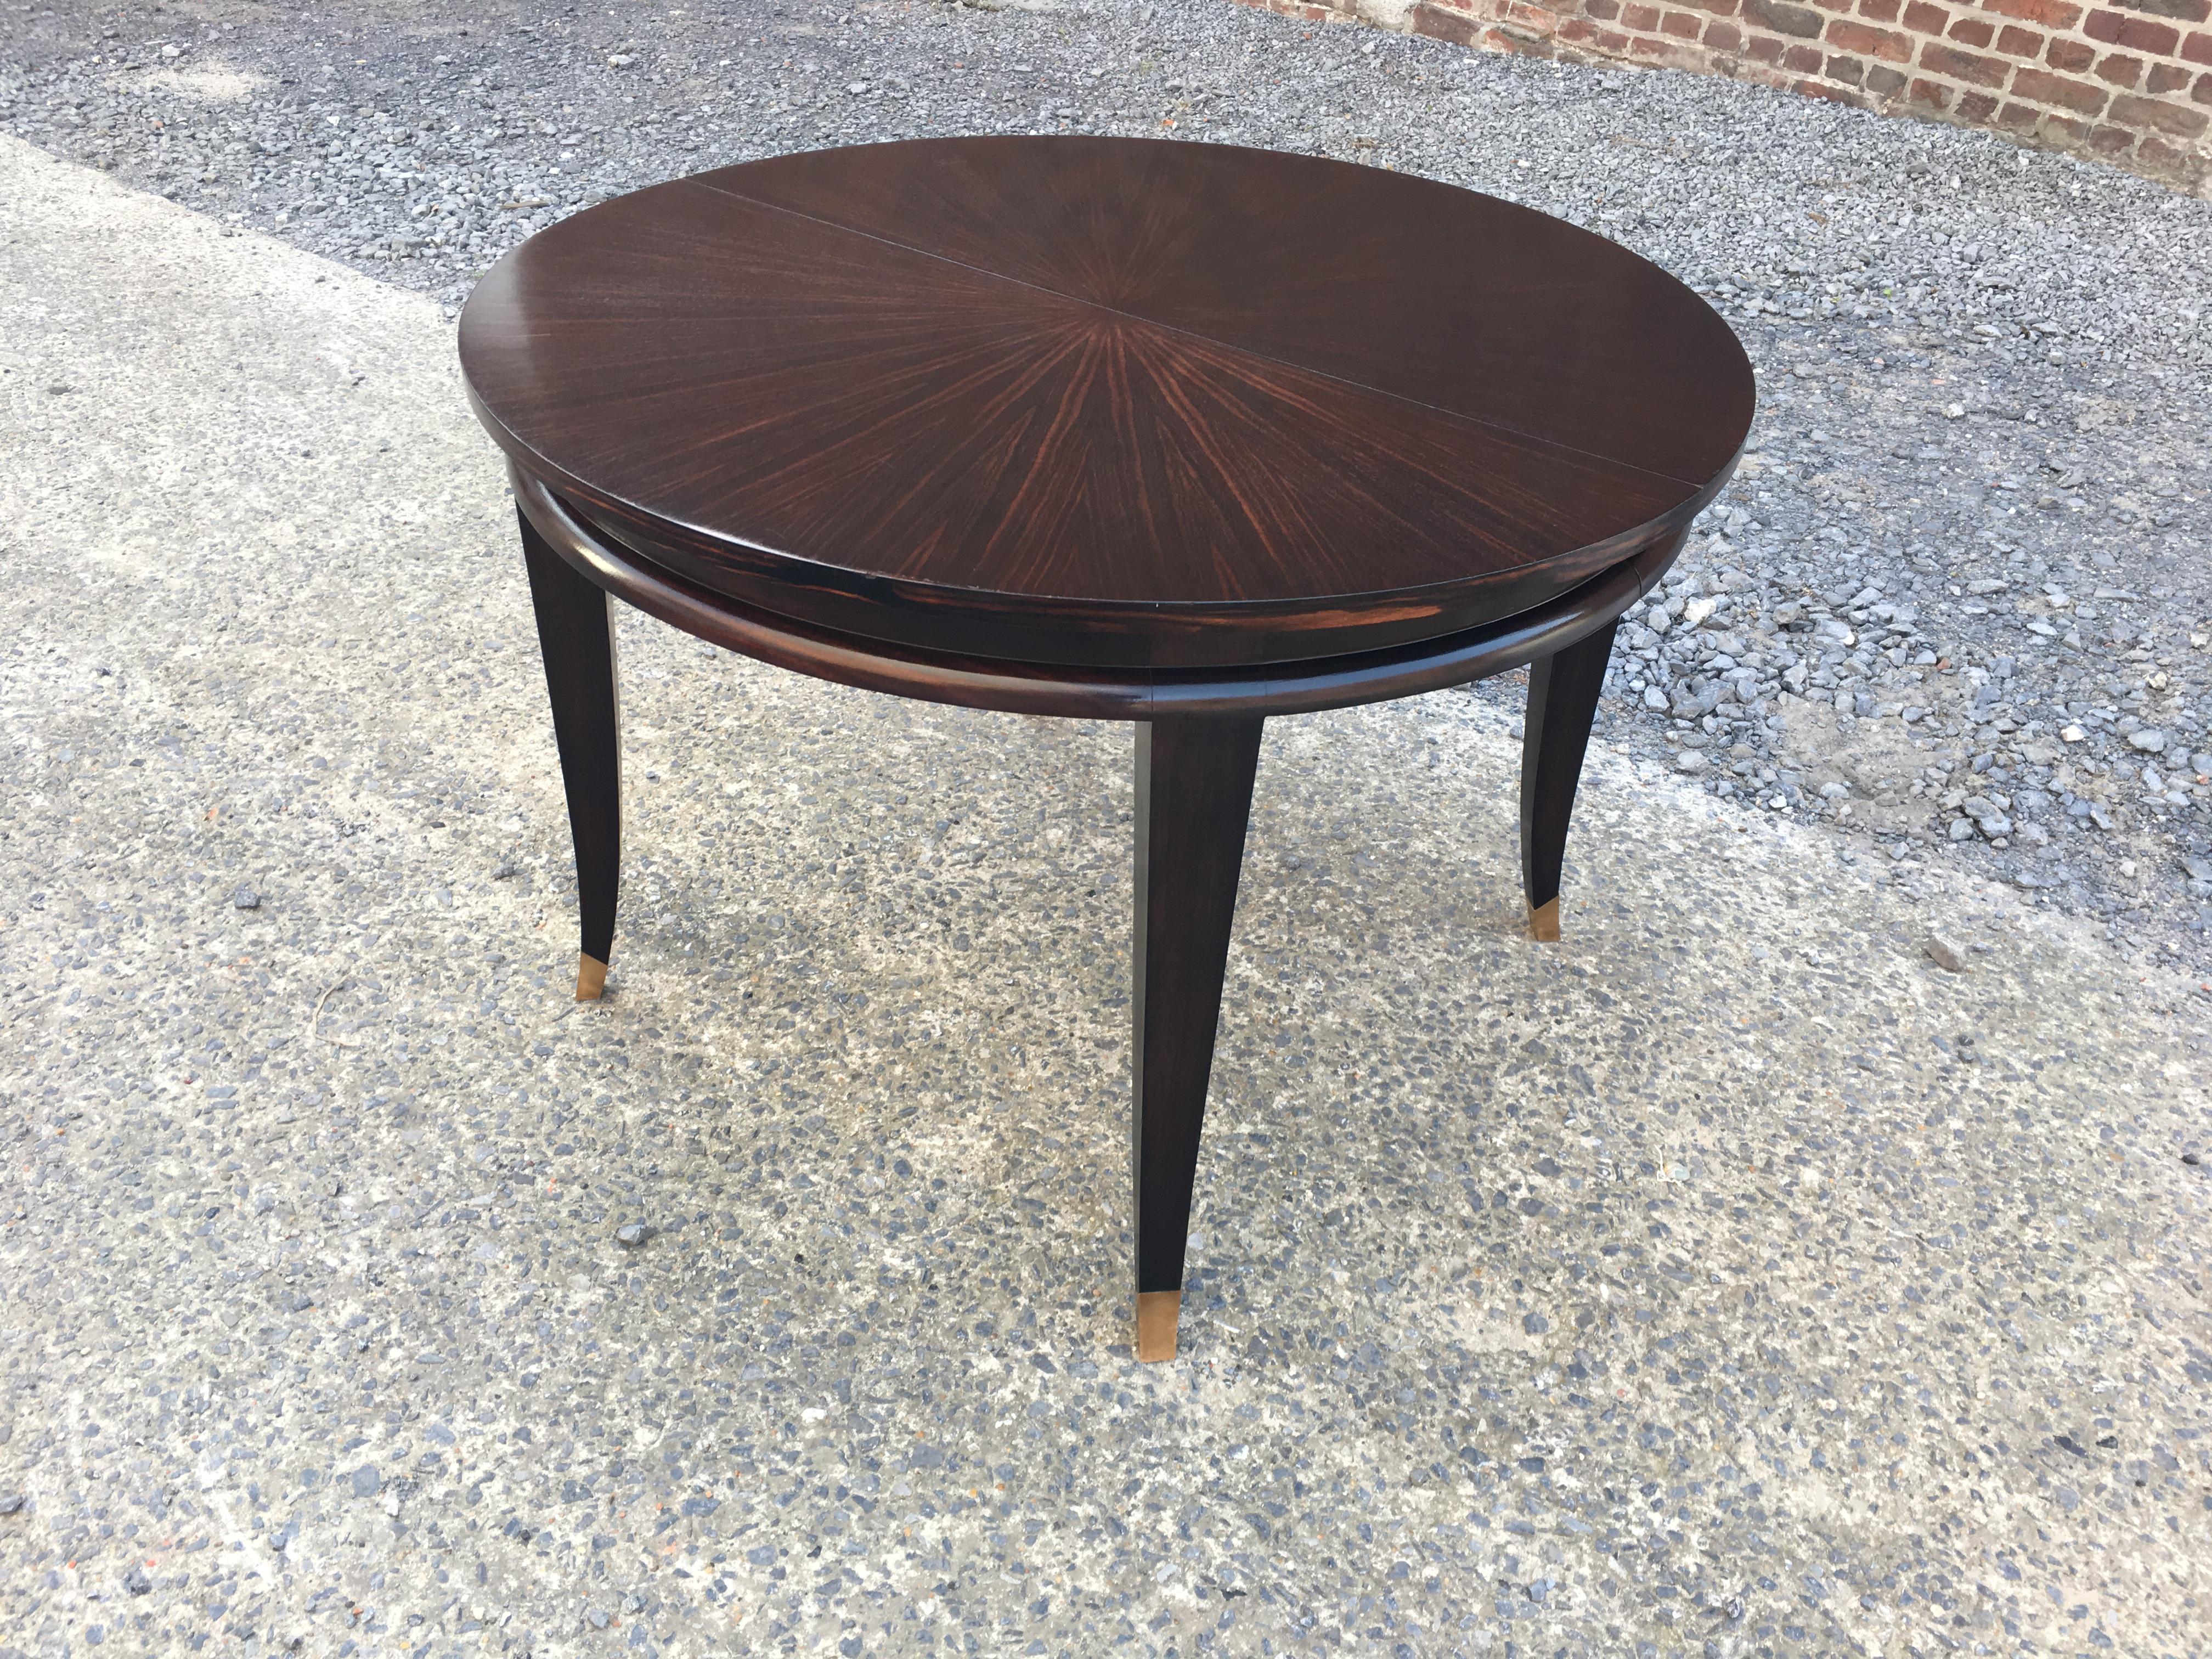 Maxime Old Attributed, Art Deco Table in Macassar Ebony Veneer, circa 1940 For Sale 5